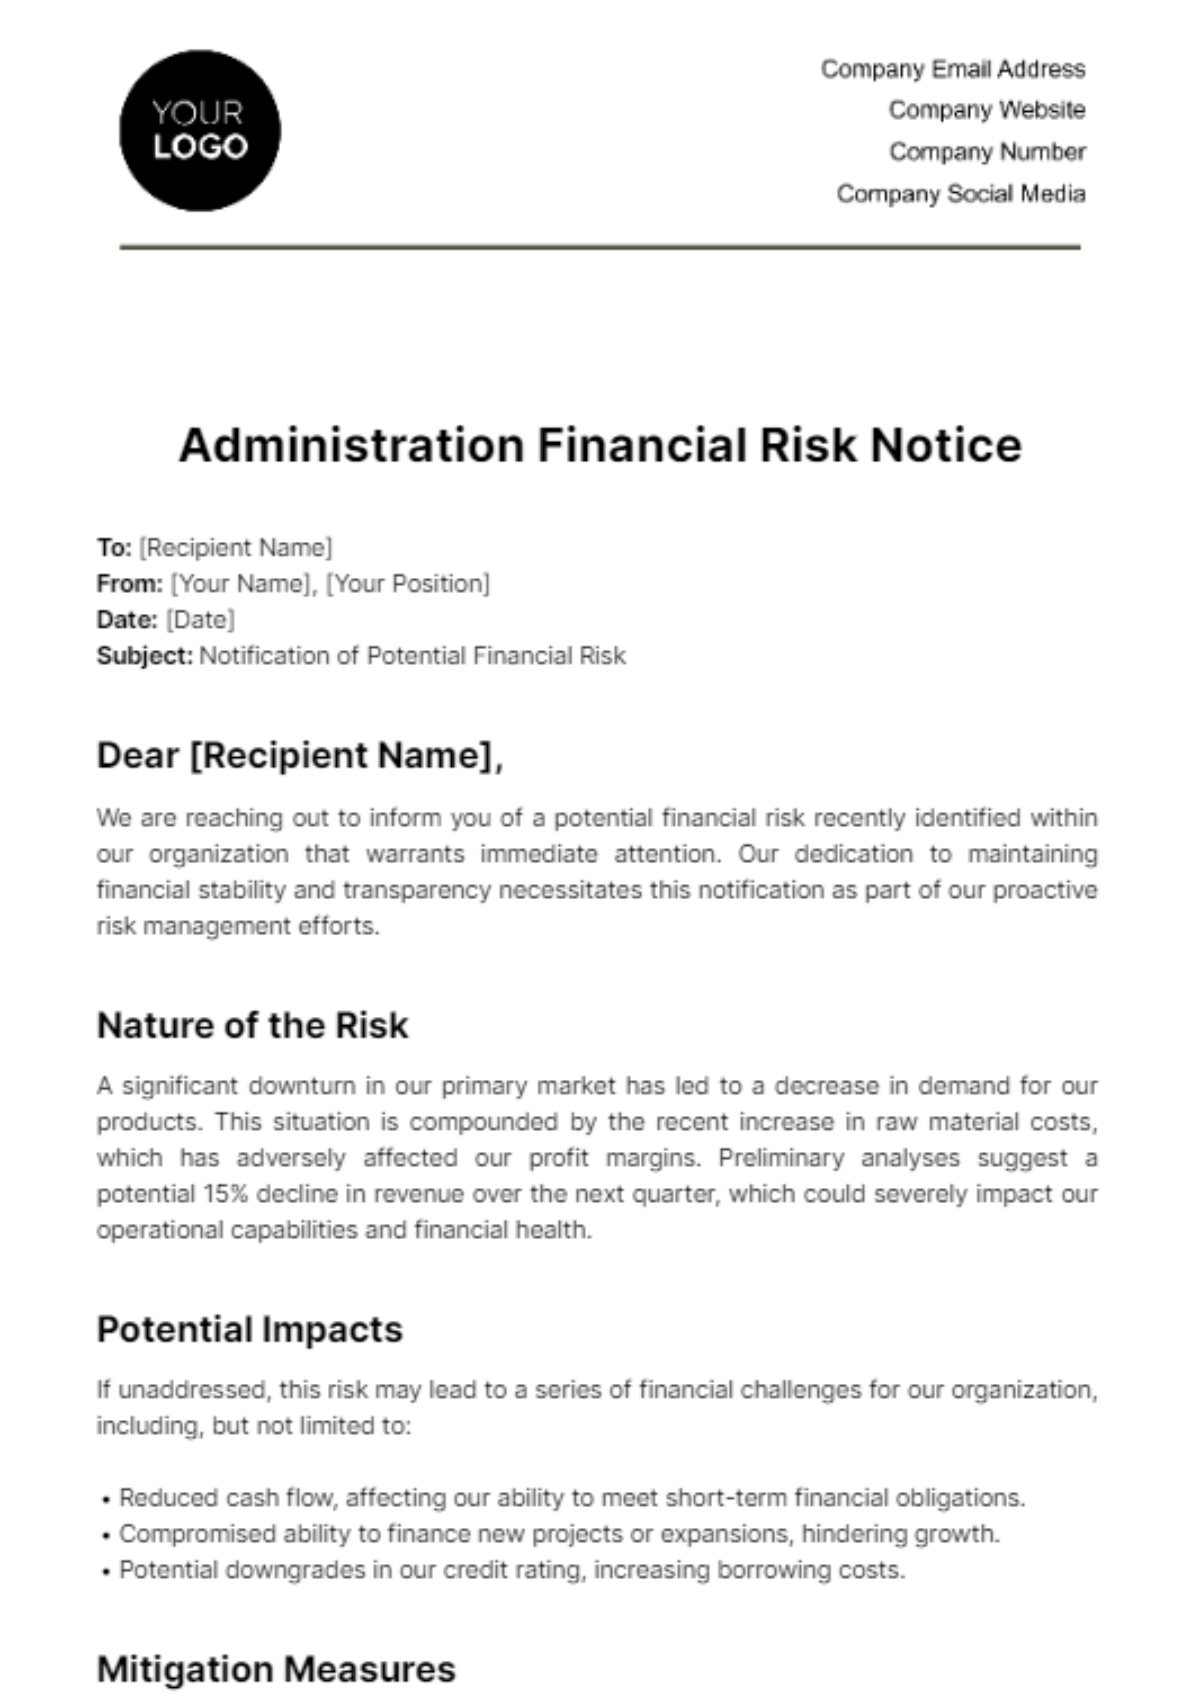 Administration Financial Risk Notice Template